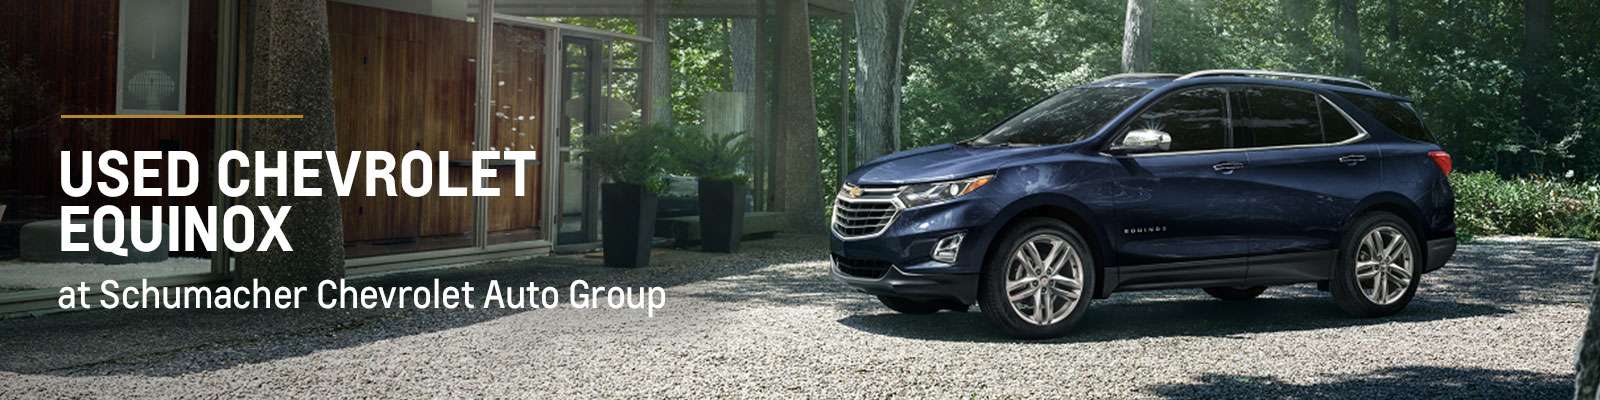 Used Chevrolet Equinox For Sale